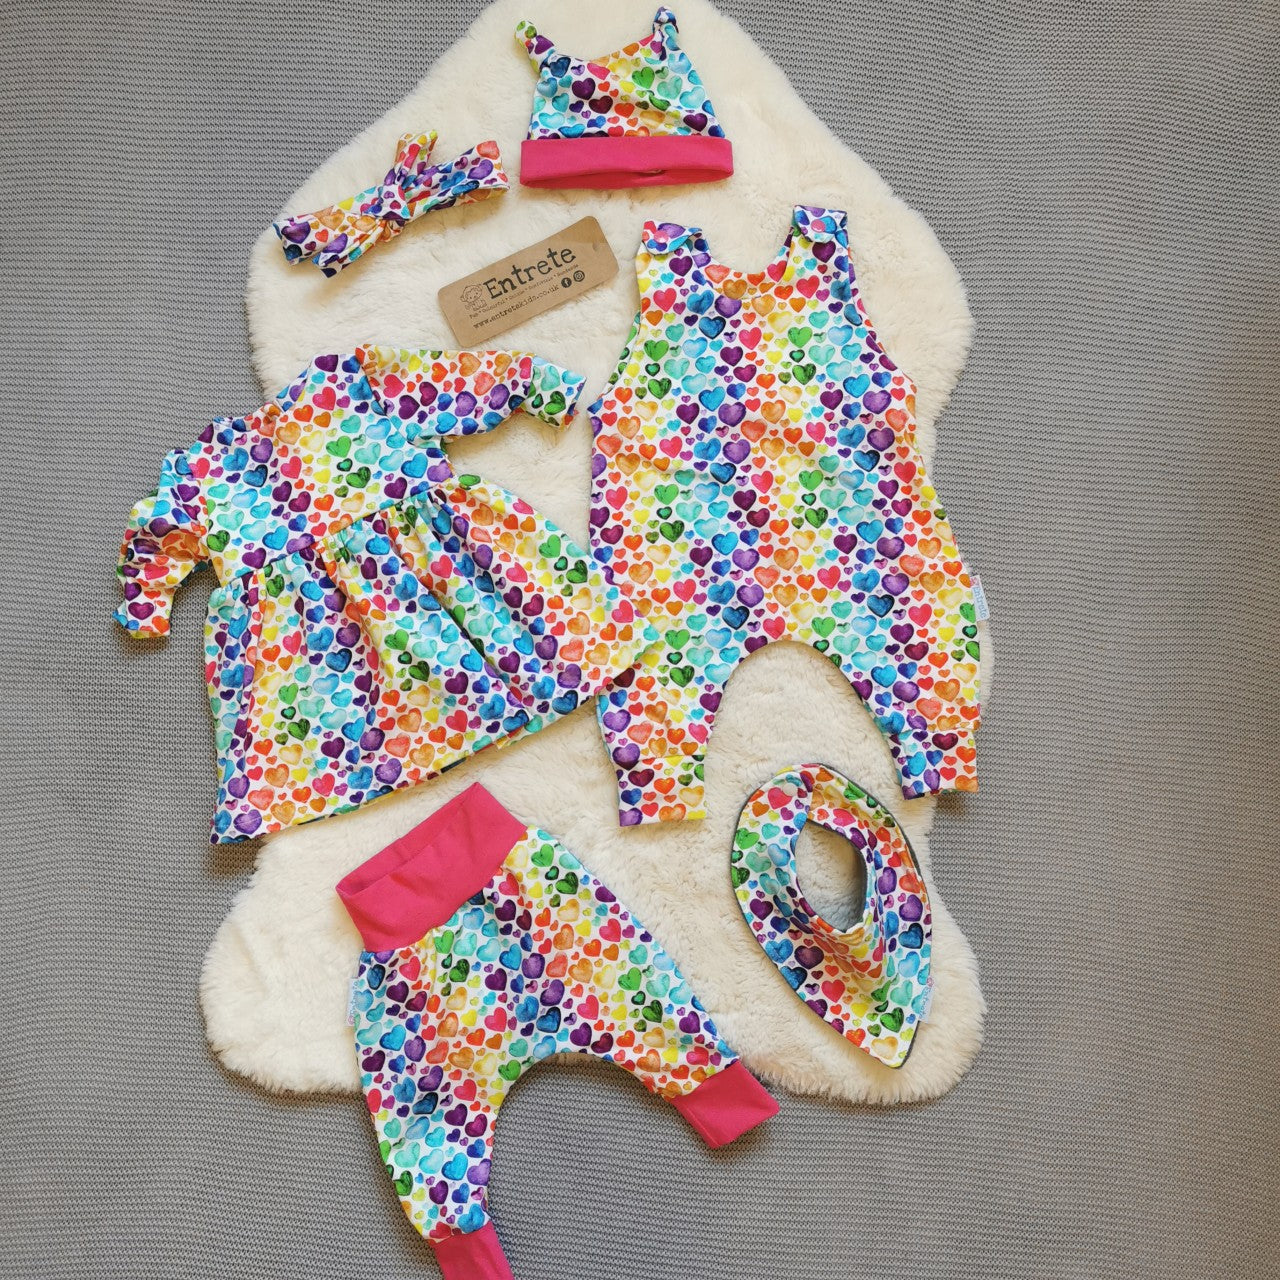 A full baby gift set shown in rainbow hearts for demonstration purposes, your gift set will be handmade using navy crocodiles cotton jersey.